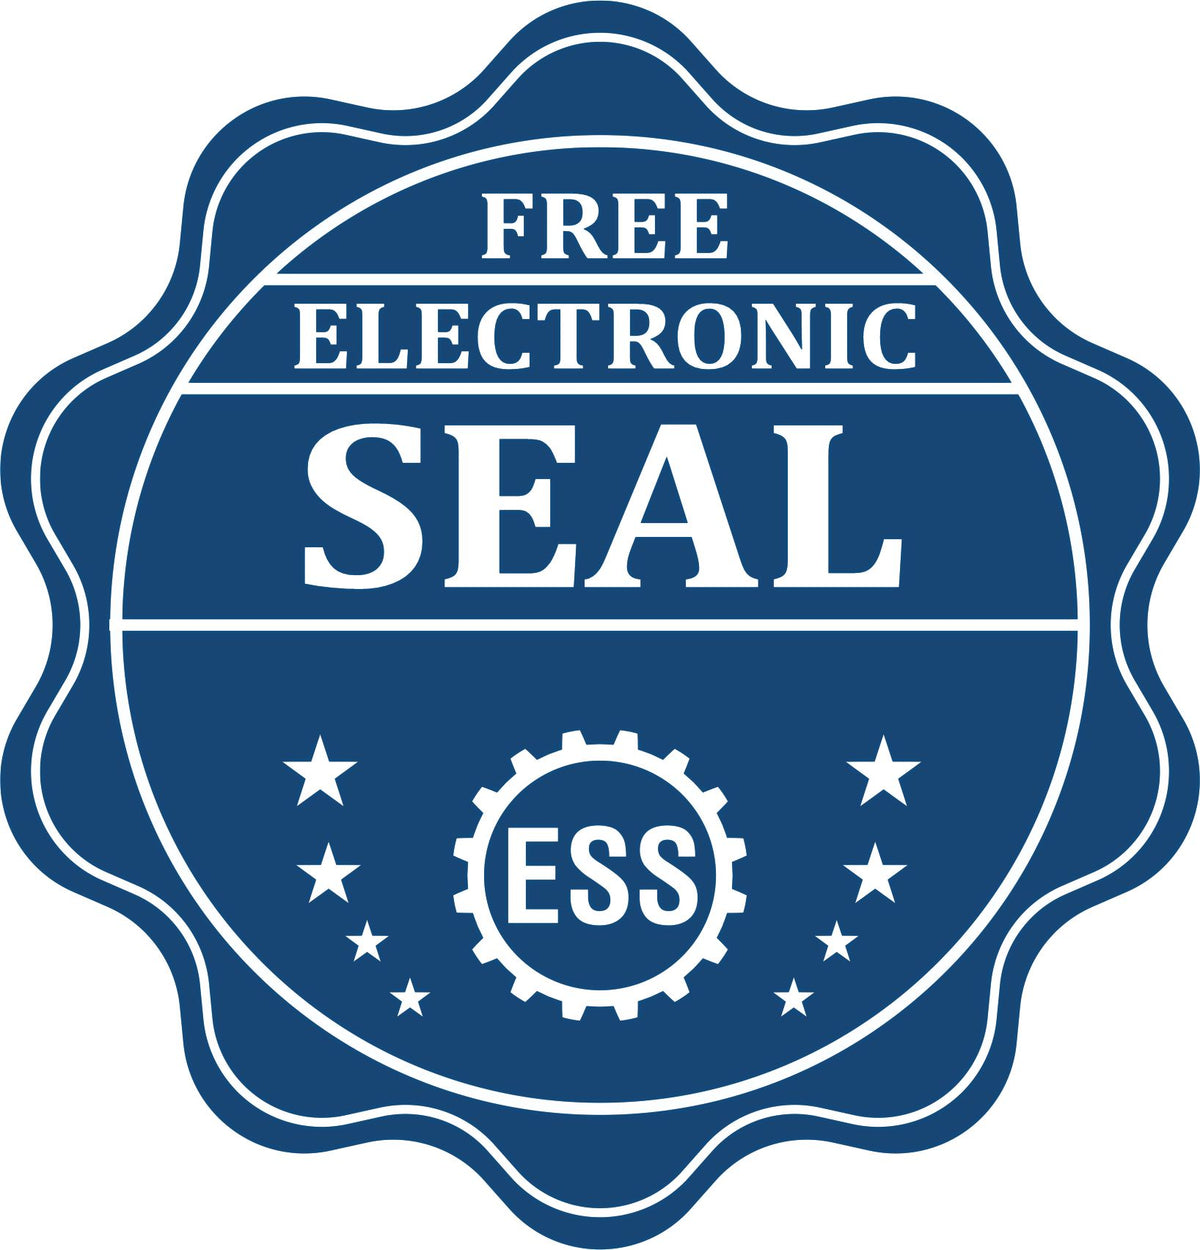 A badge showing a free electronic seal for the Slim Pre-Inked Montana Landscape Architect Seal Stamp with stars and the ESS gear on the emblem.